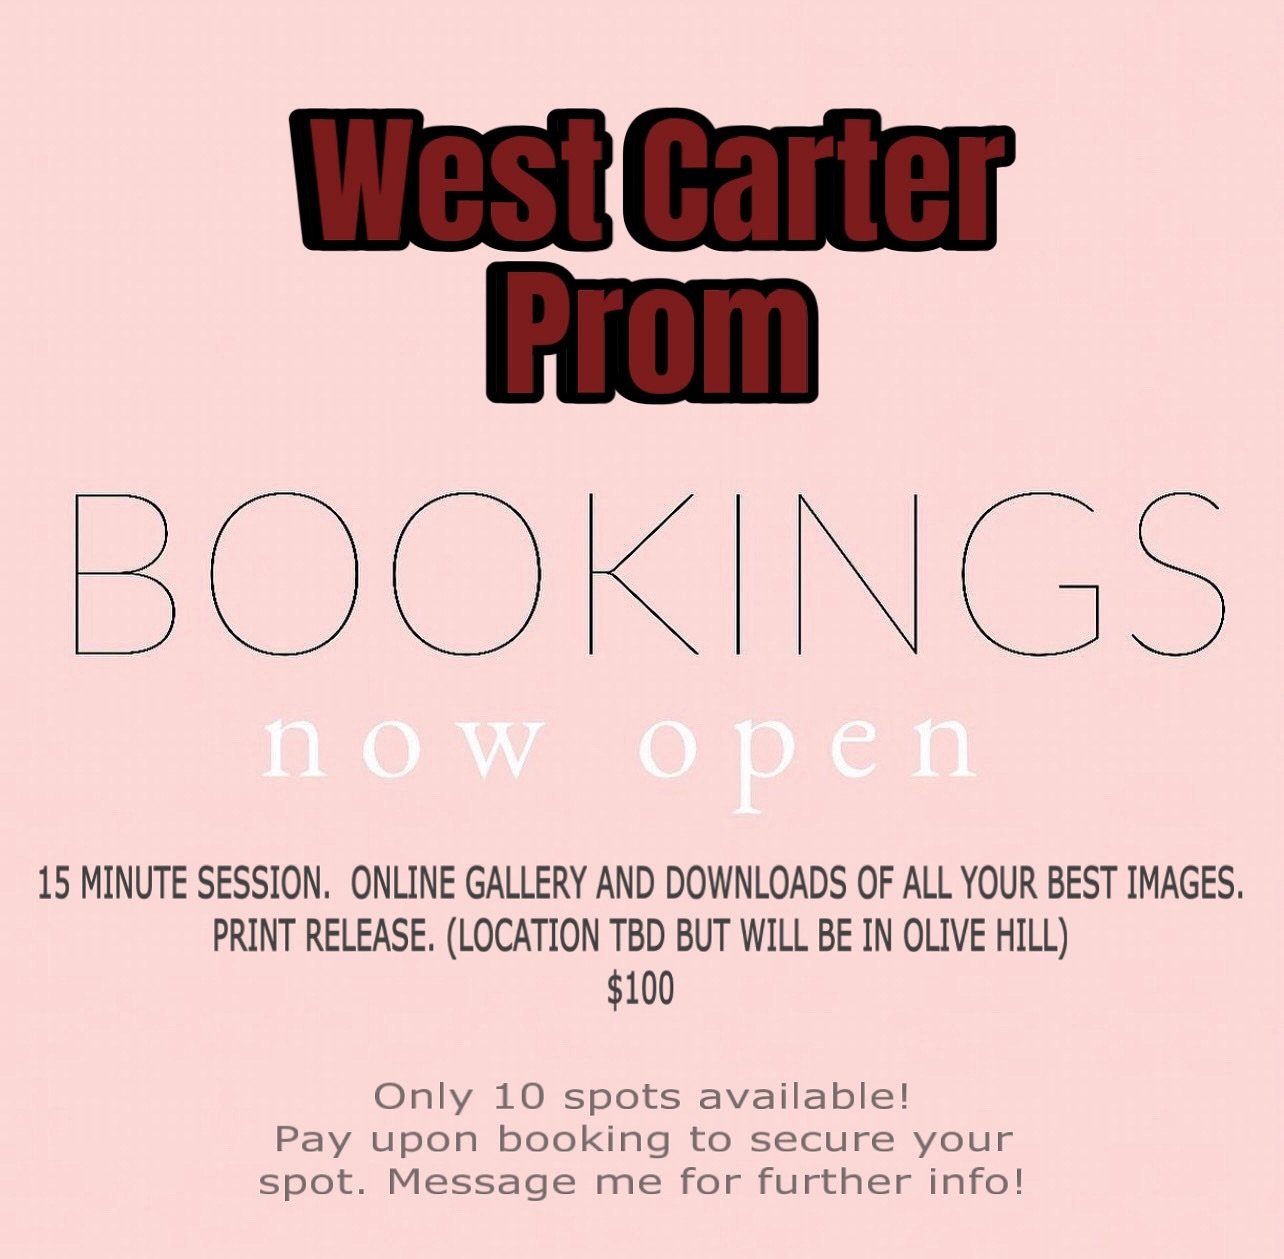 Taking on some West prom spots!! Message me to book yours!!🫶🏻